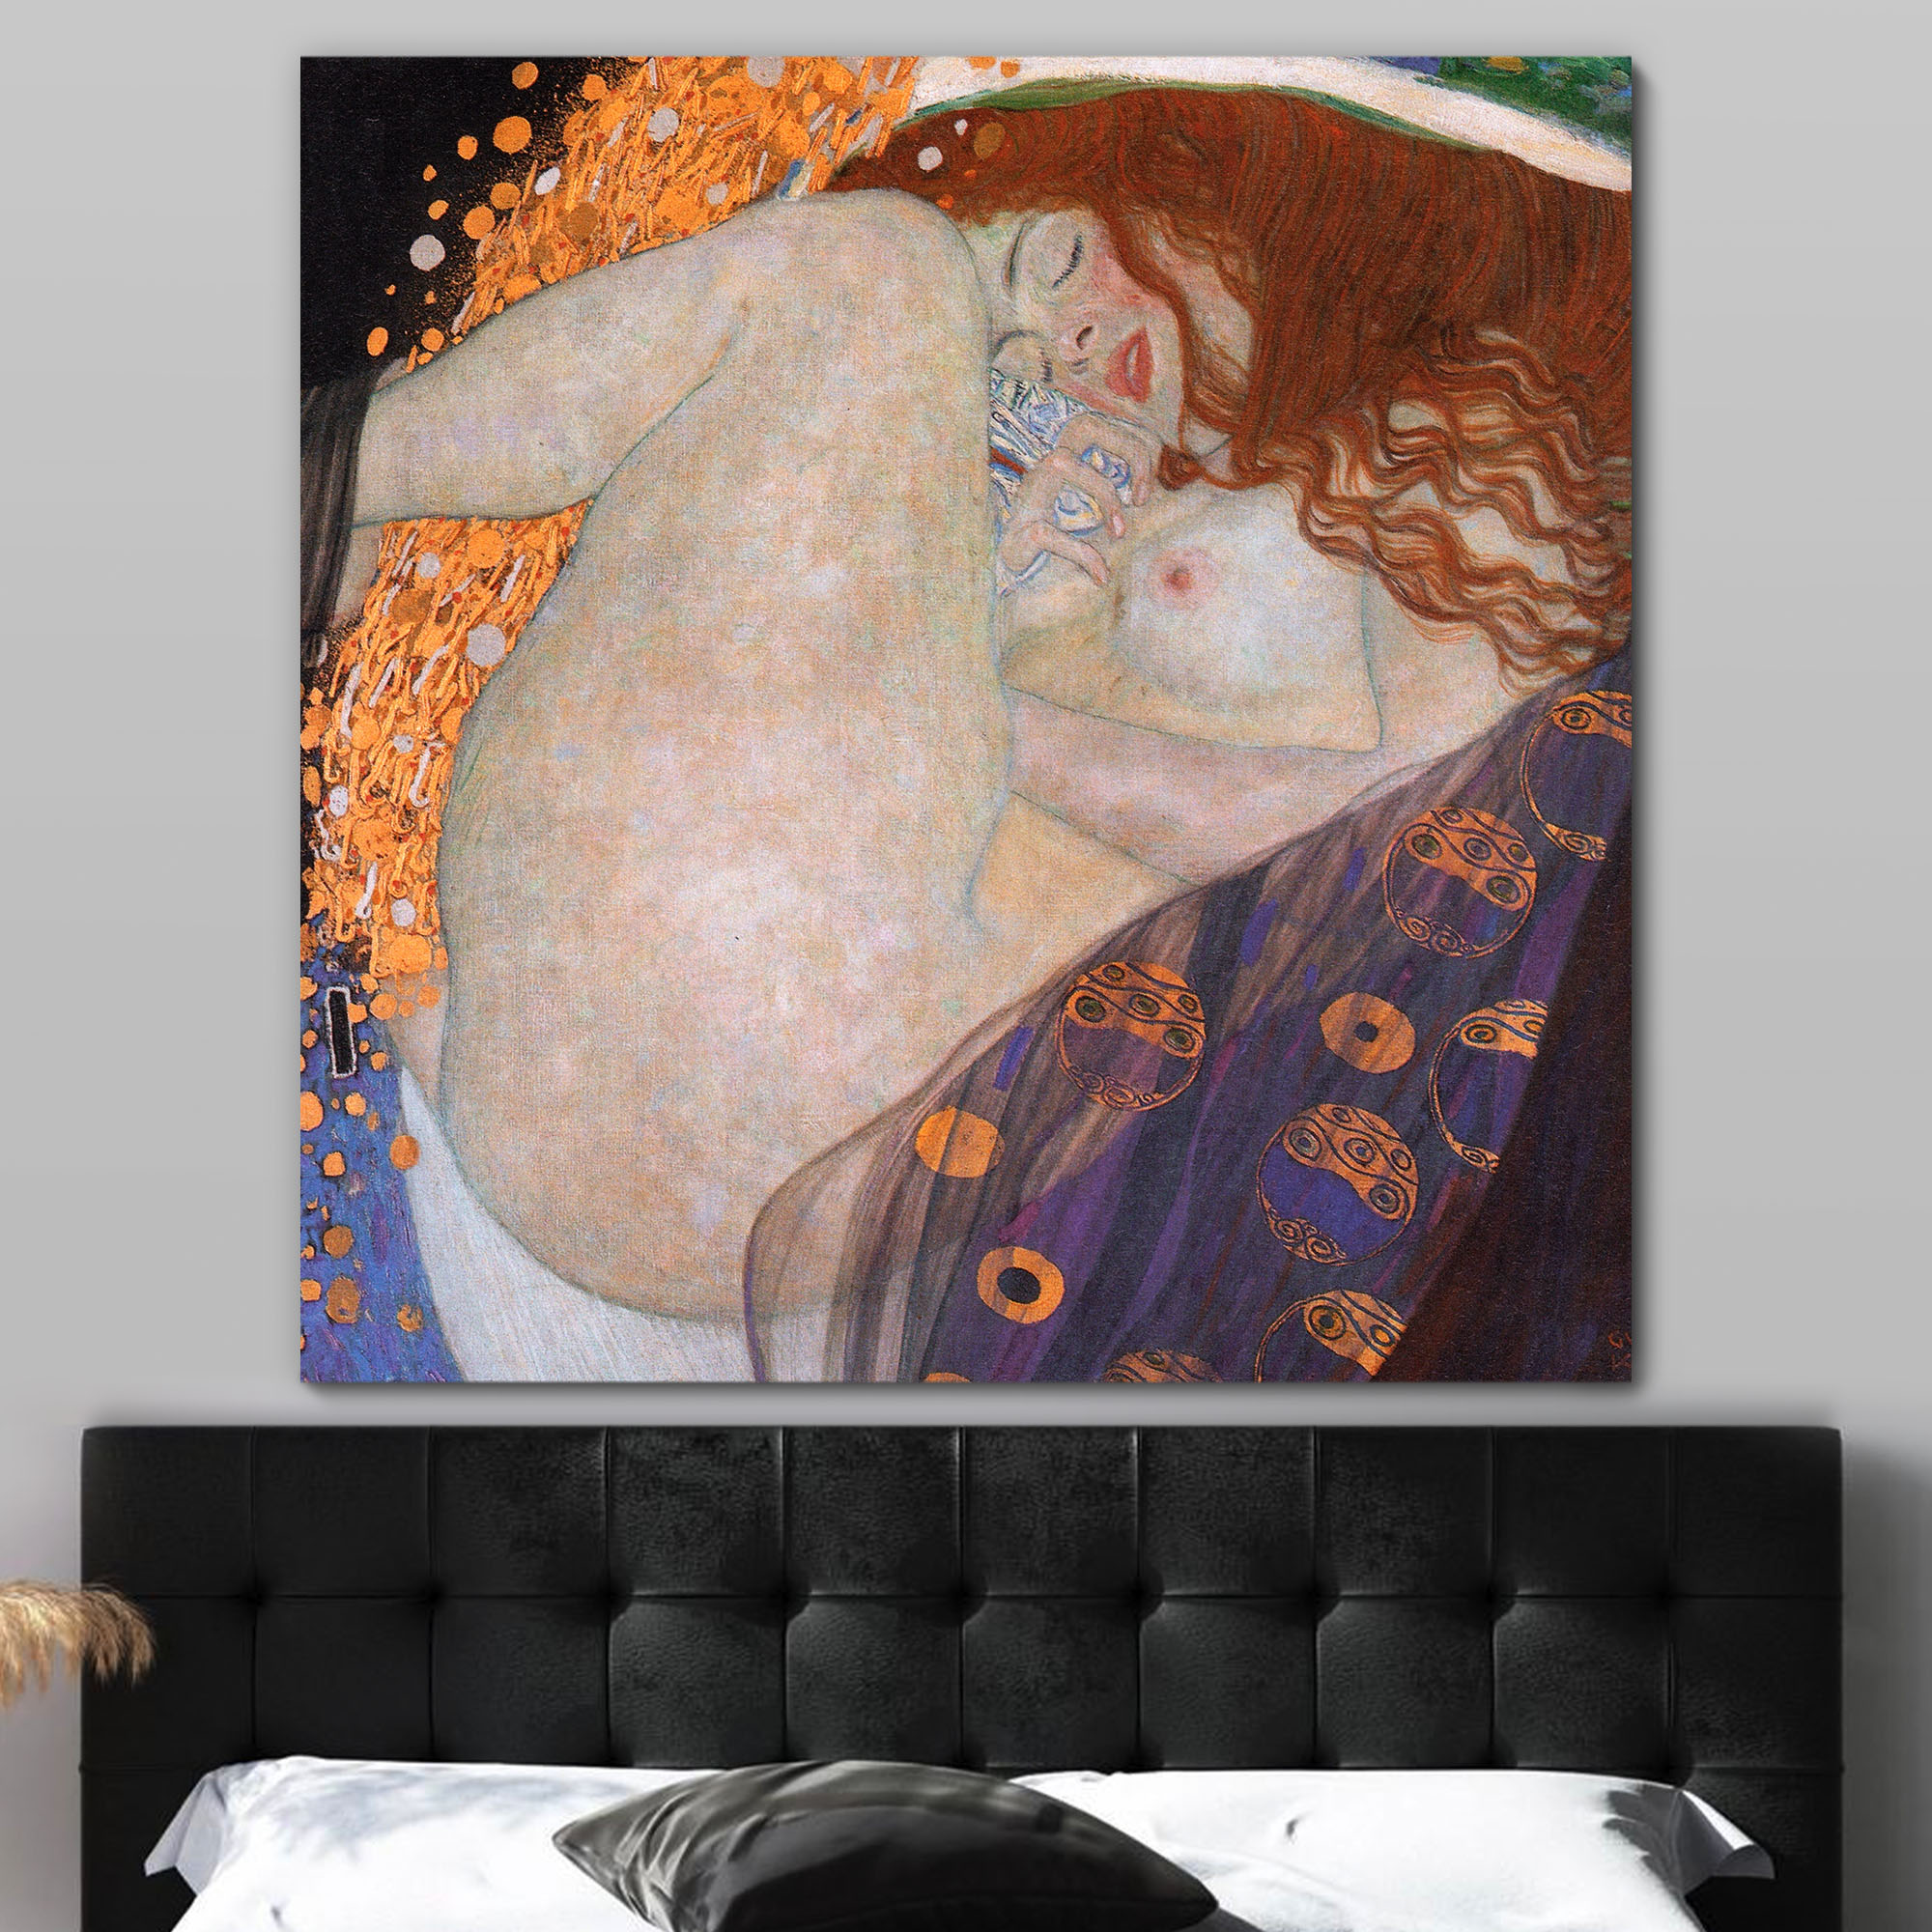 Danae by klimt on the wall above a bed